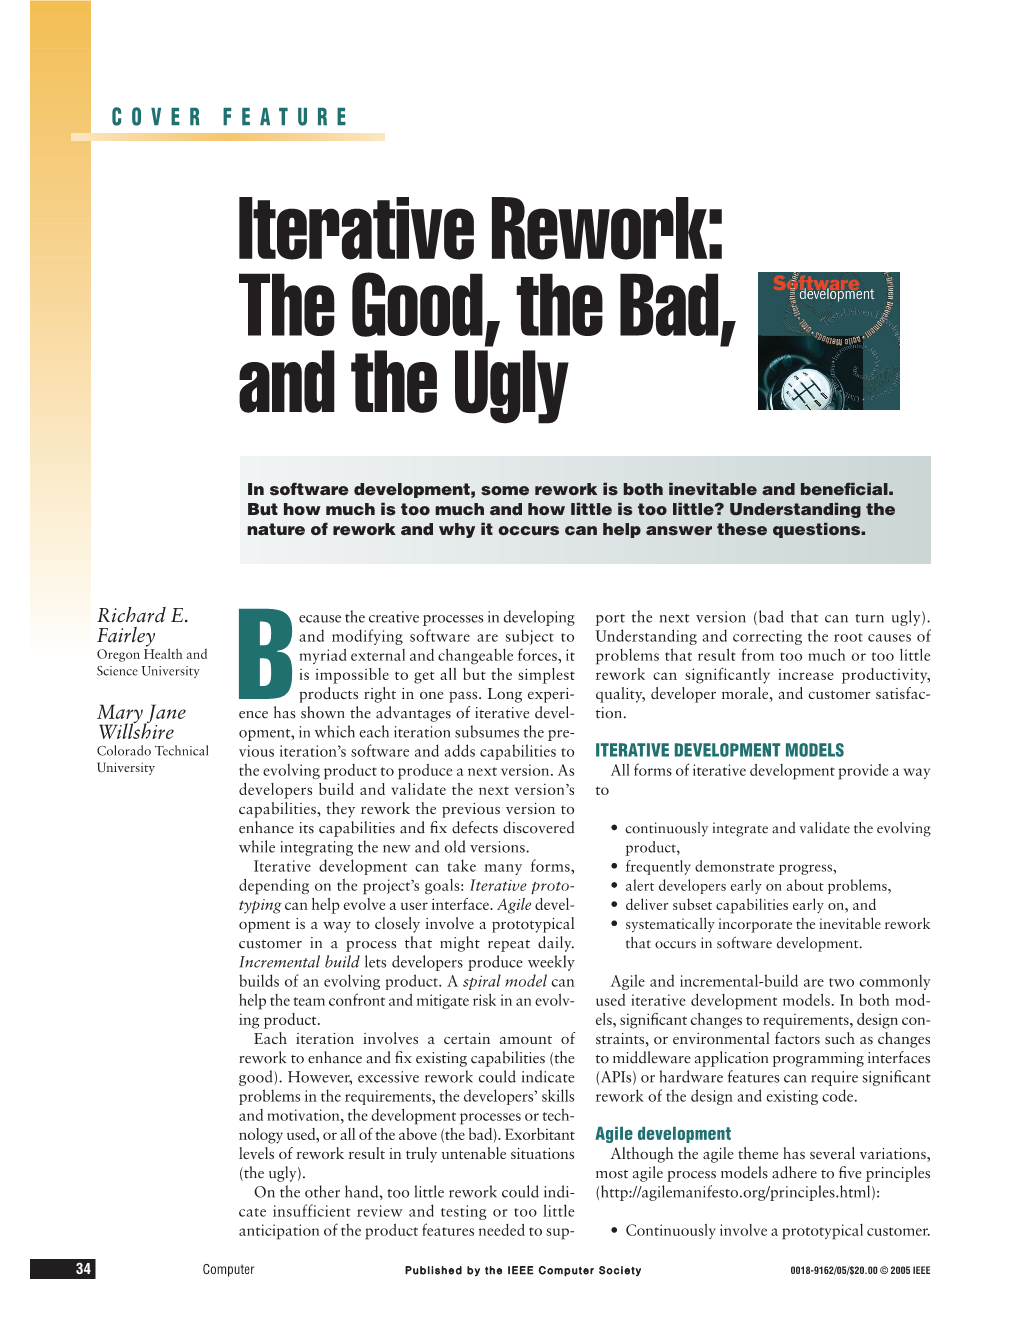 Iterative Rework: the Good, the Bad, and the Ugly